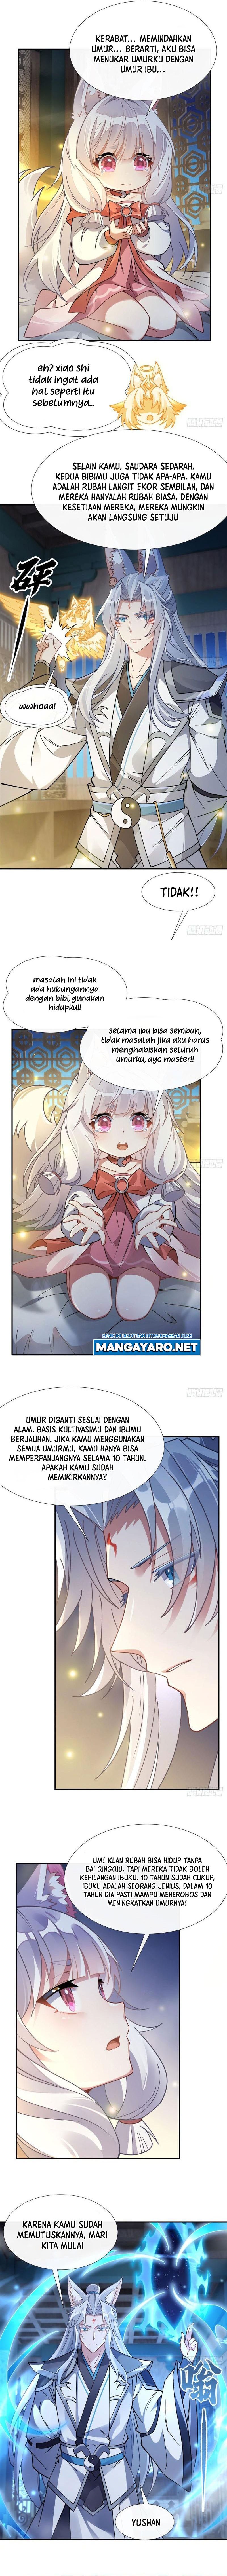 Dilarang COPAS - situs resmi www.mangacanblog.com - Komik my female apprentices are all big shots from the future 178 - chapter 178 179 Indonesia my female apprentices are all big shots from the future 178 - chapter 178 Terbaru 6|Baca Manga Komik Indonesia|Mangacan